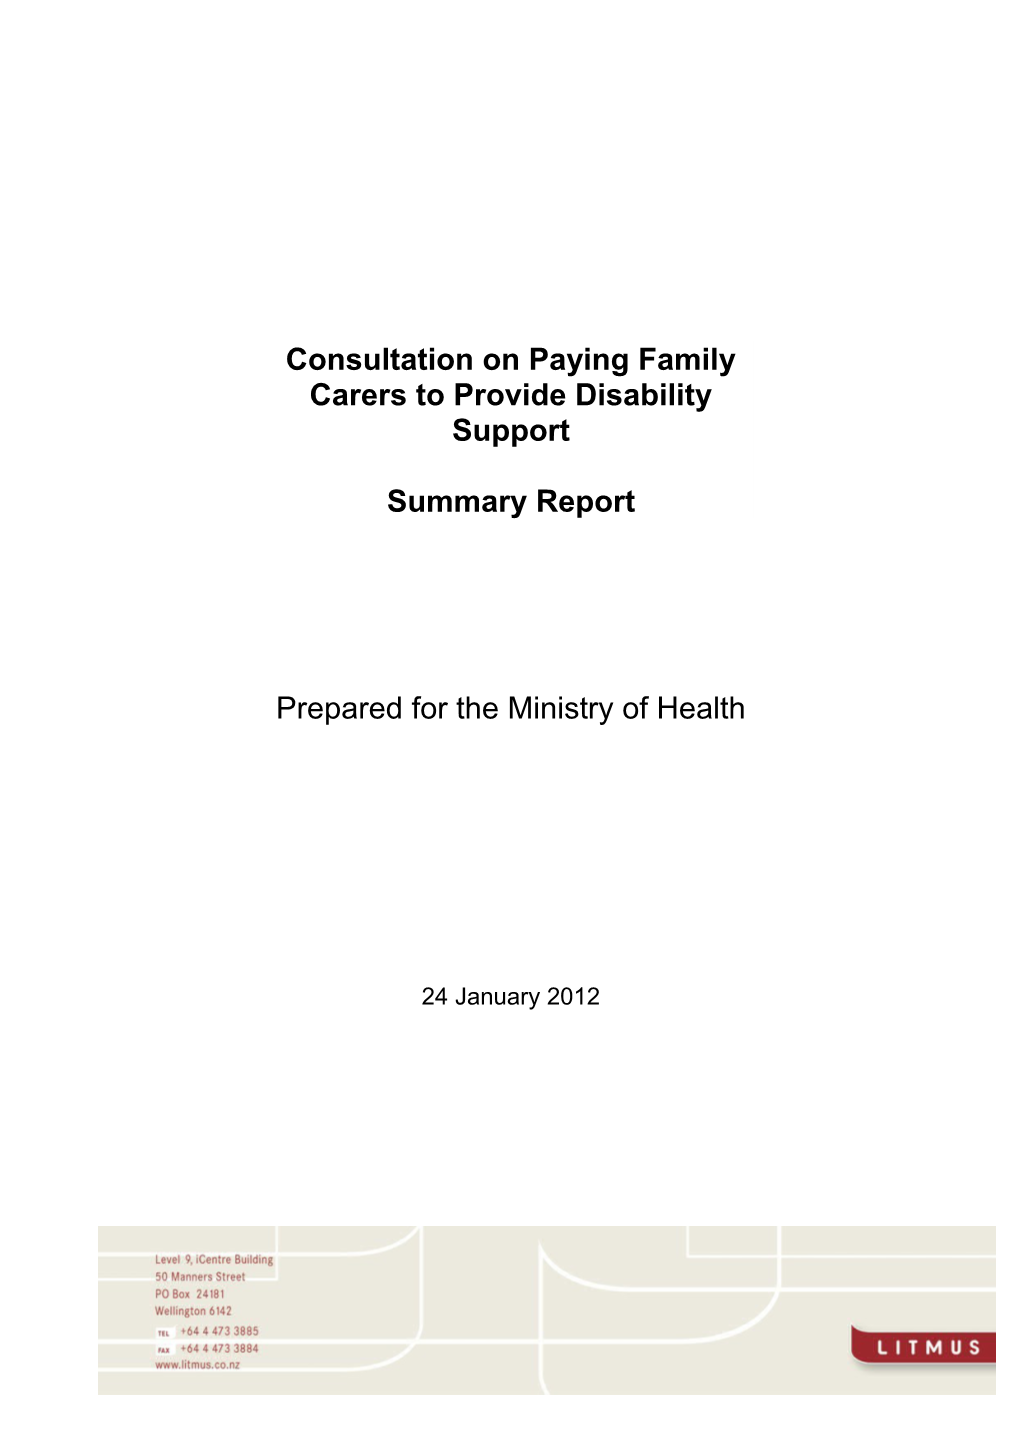 Consultation on Paying Family Carers to Provide Disability Support: Summary Report